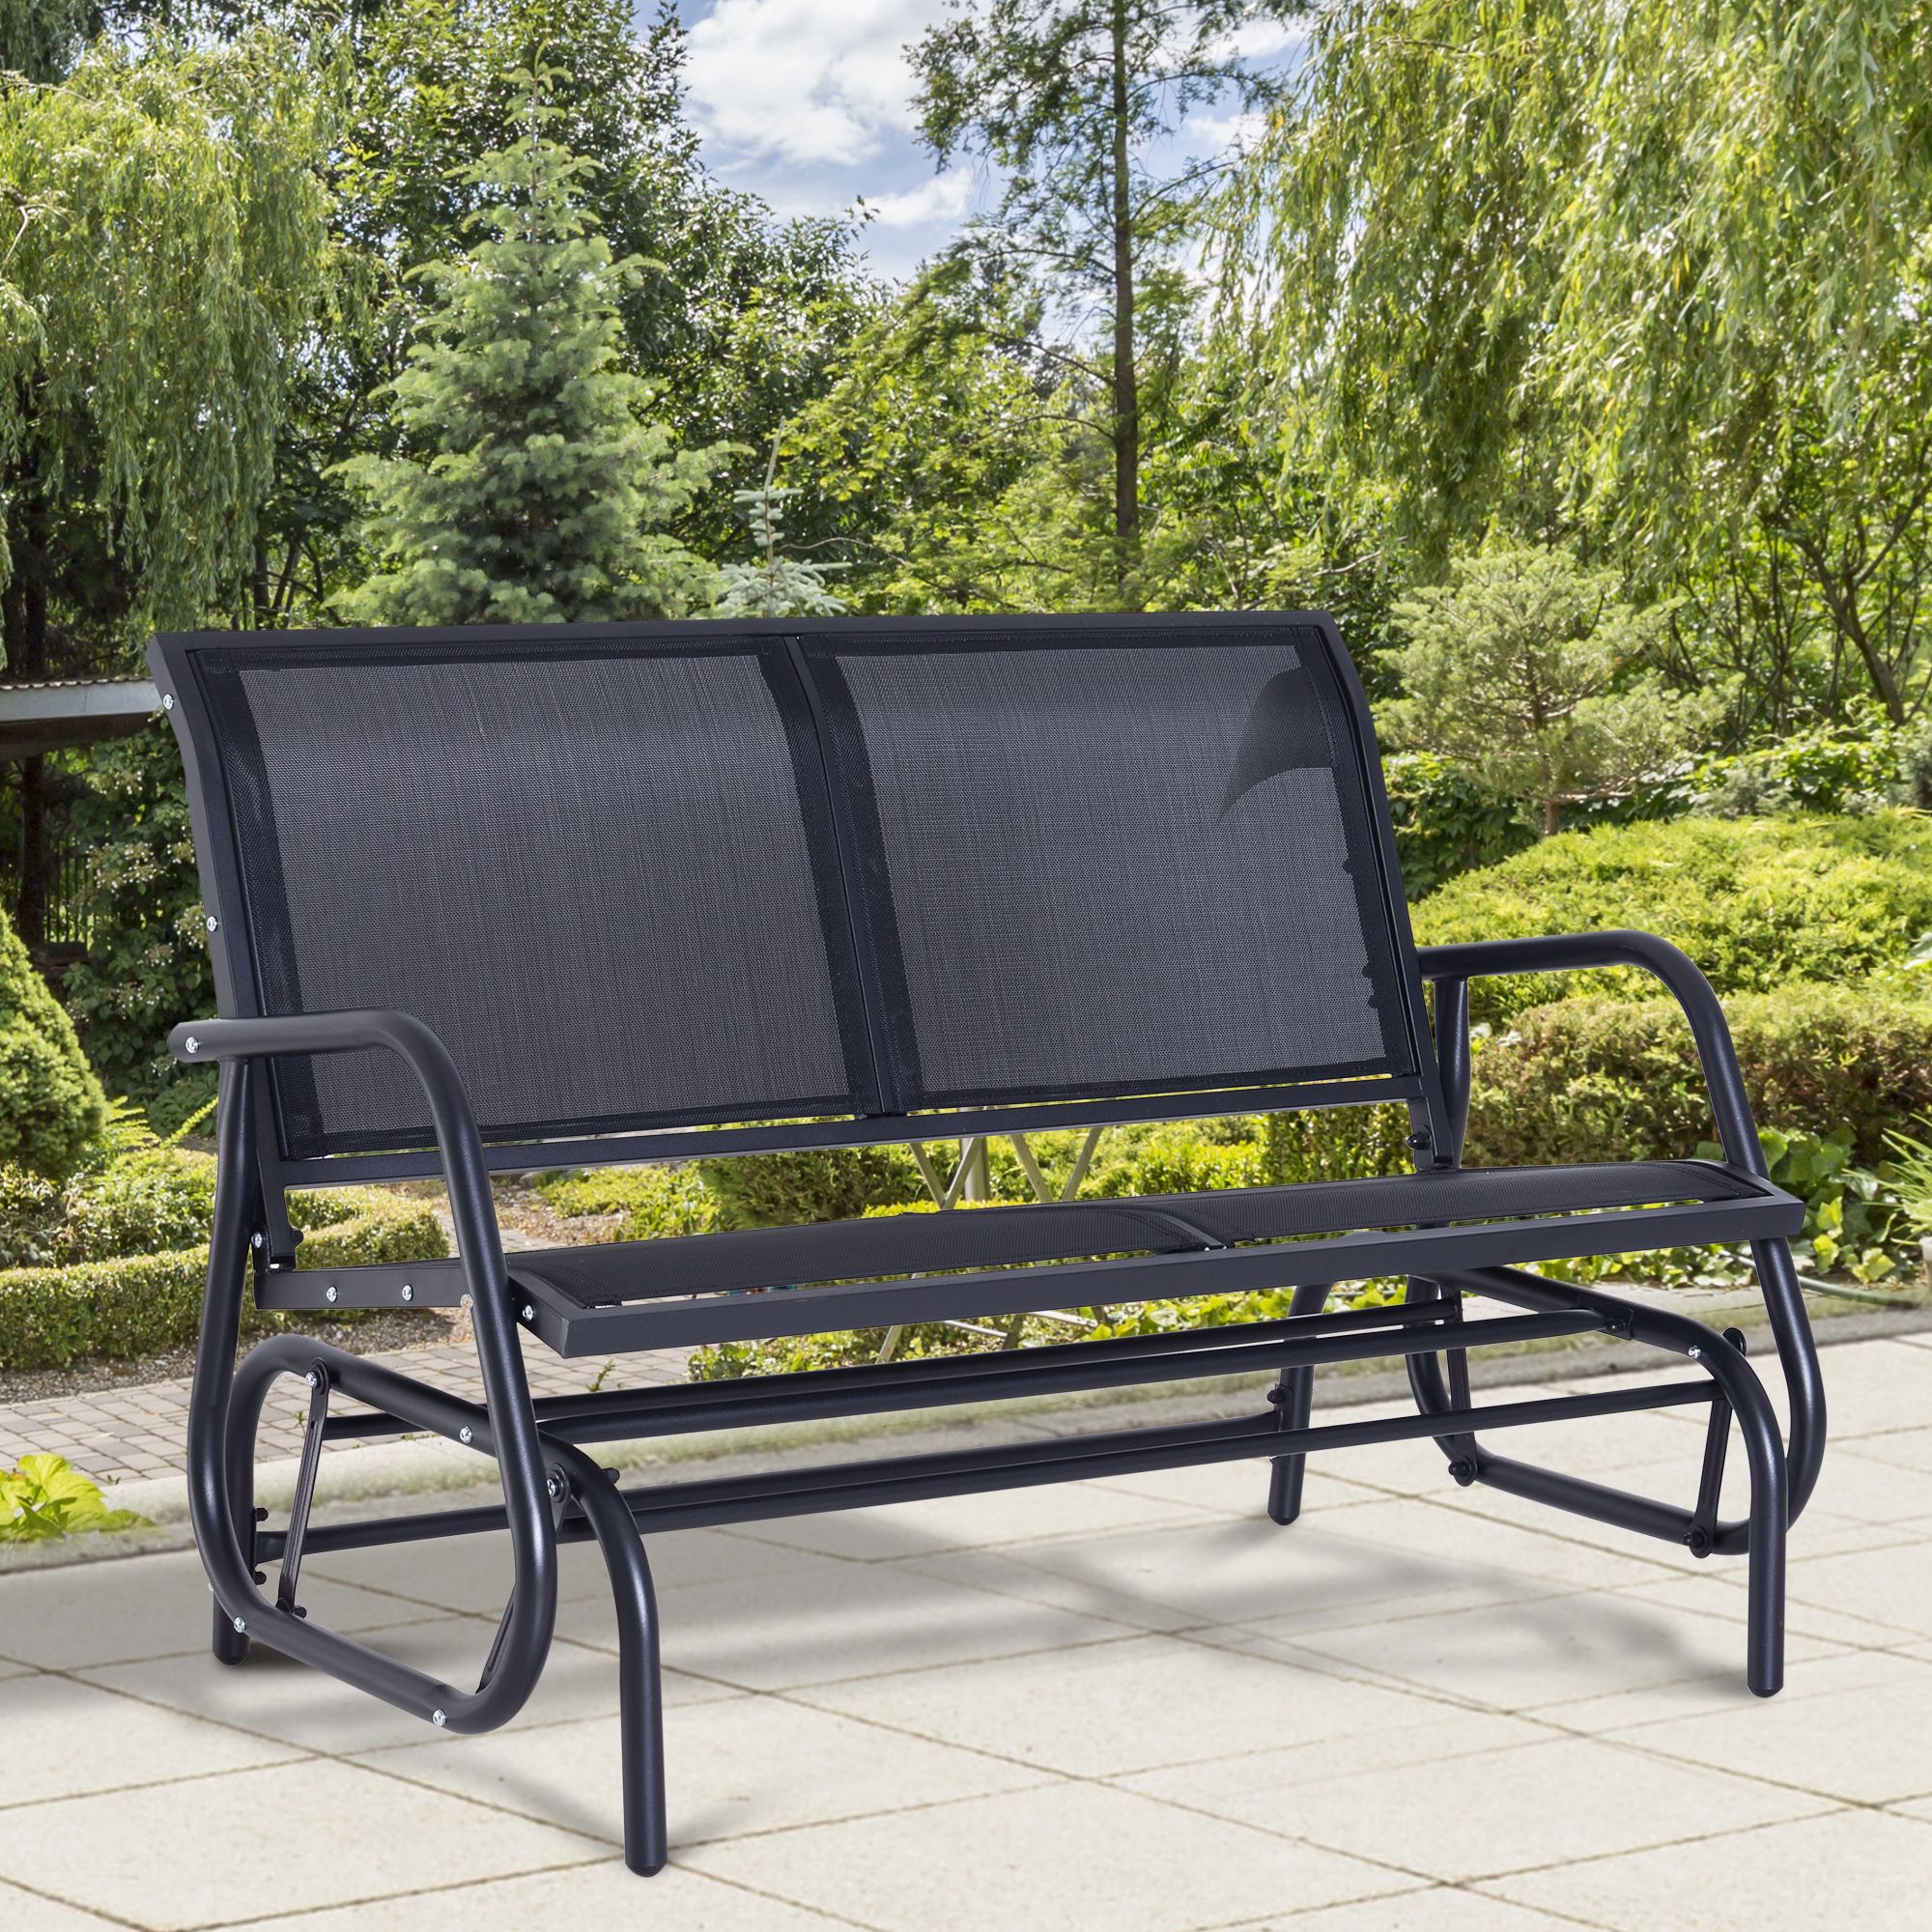 Outsunny Steel Sling Fabric Outdoor Double Glider Rocking Throughout Padded Sling Double Glider Benches (View 22 of 25)